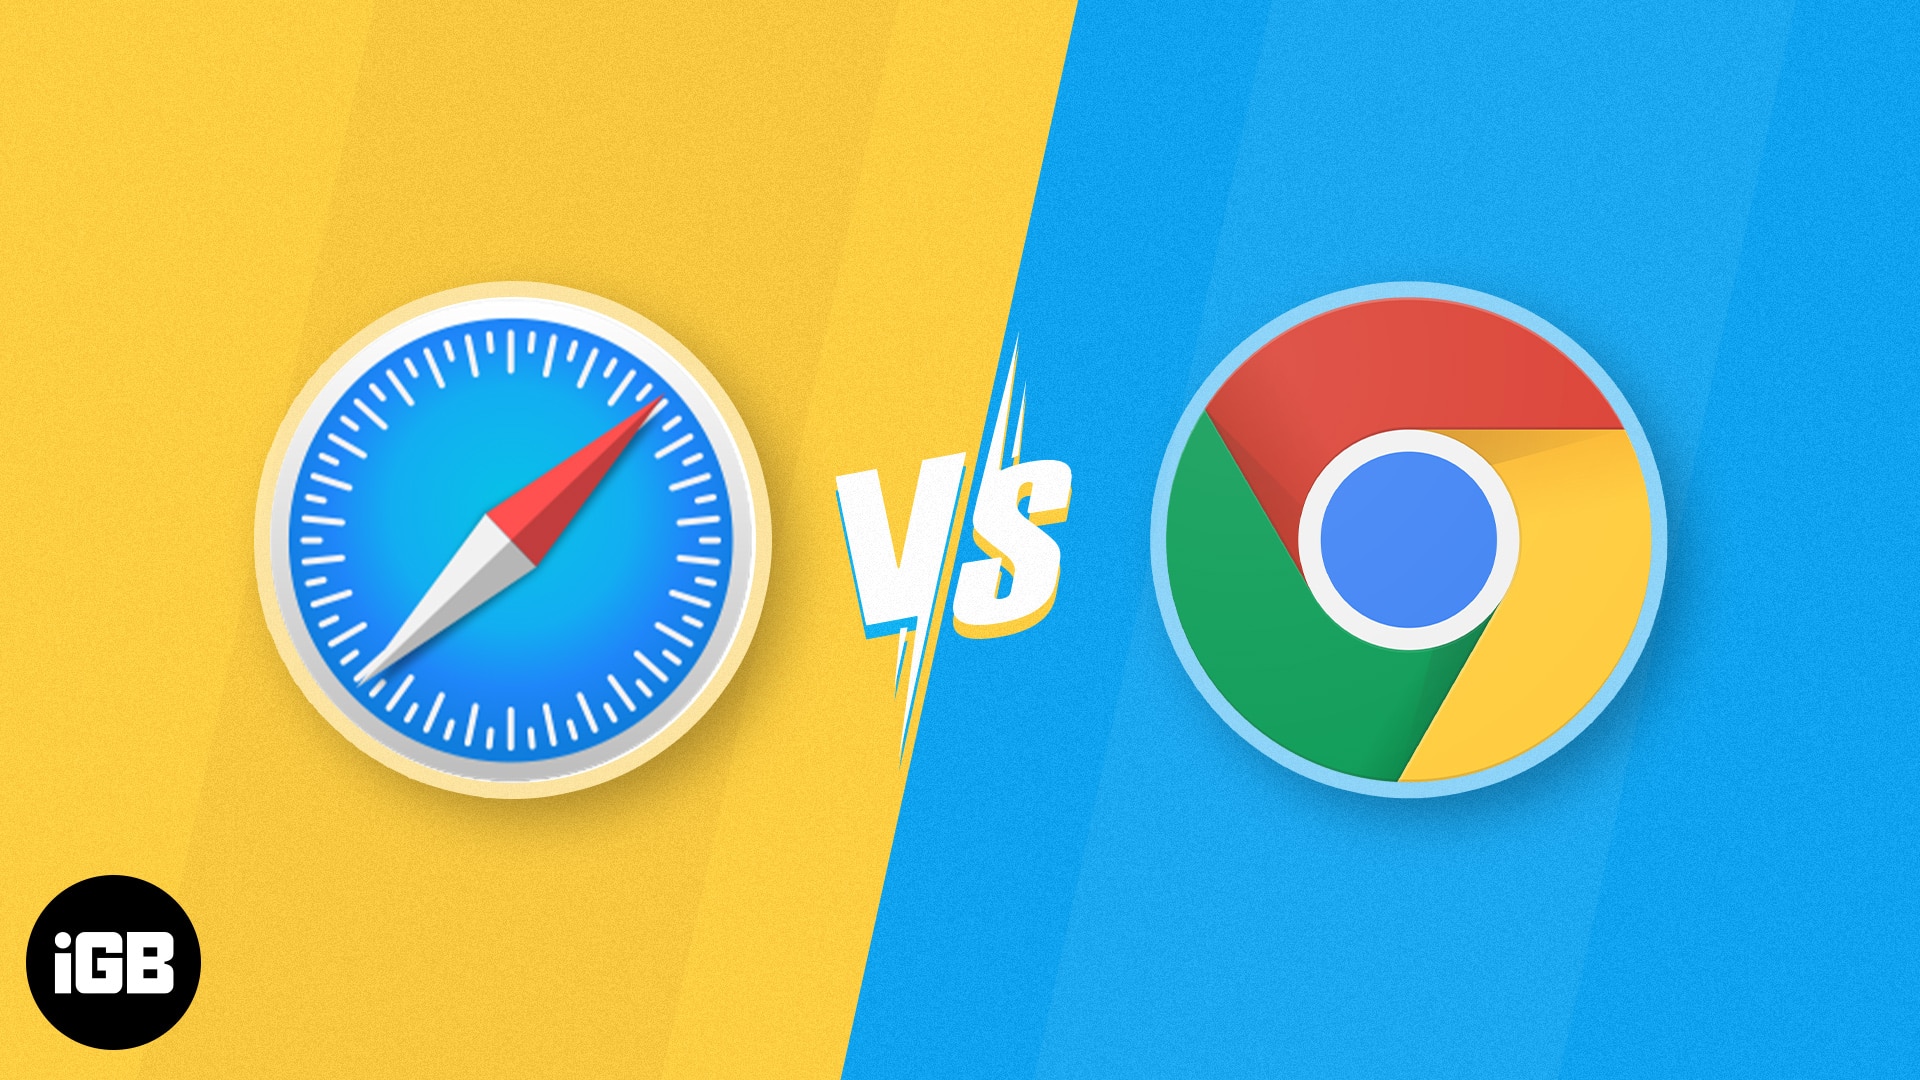 Safari vs chrome which browser is better for iphone and mac